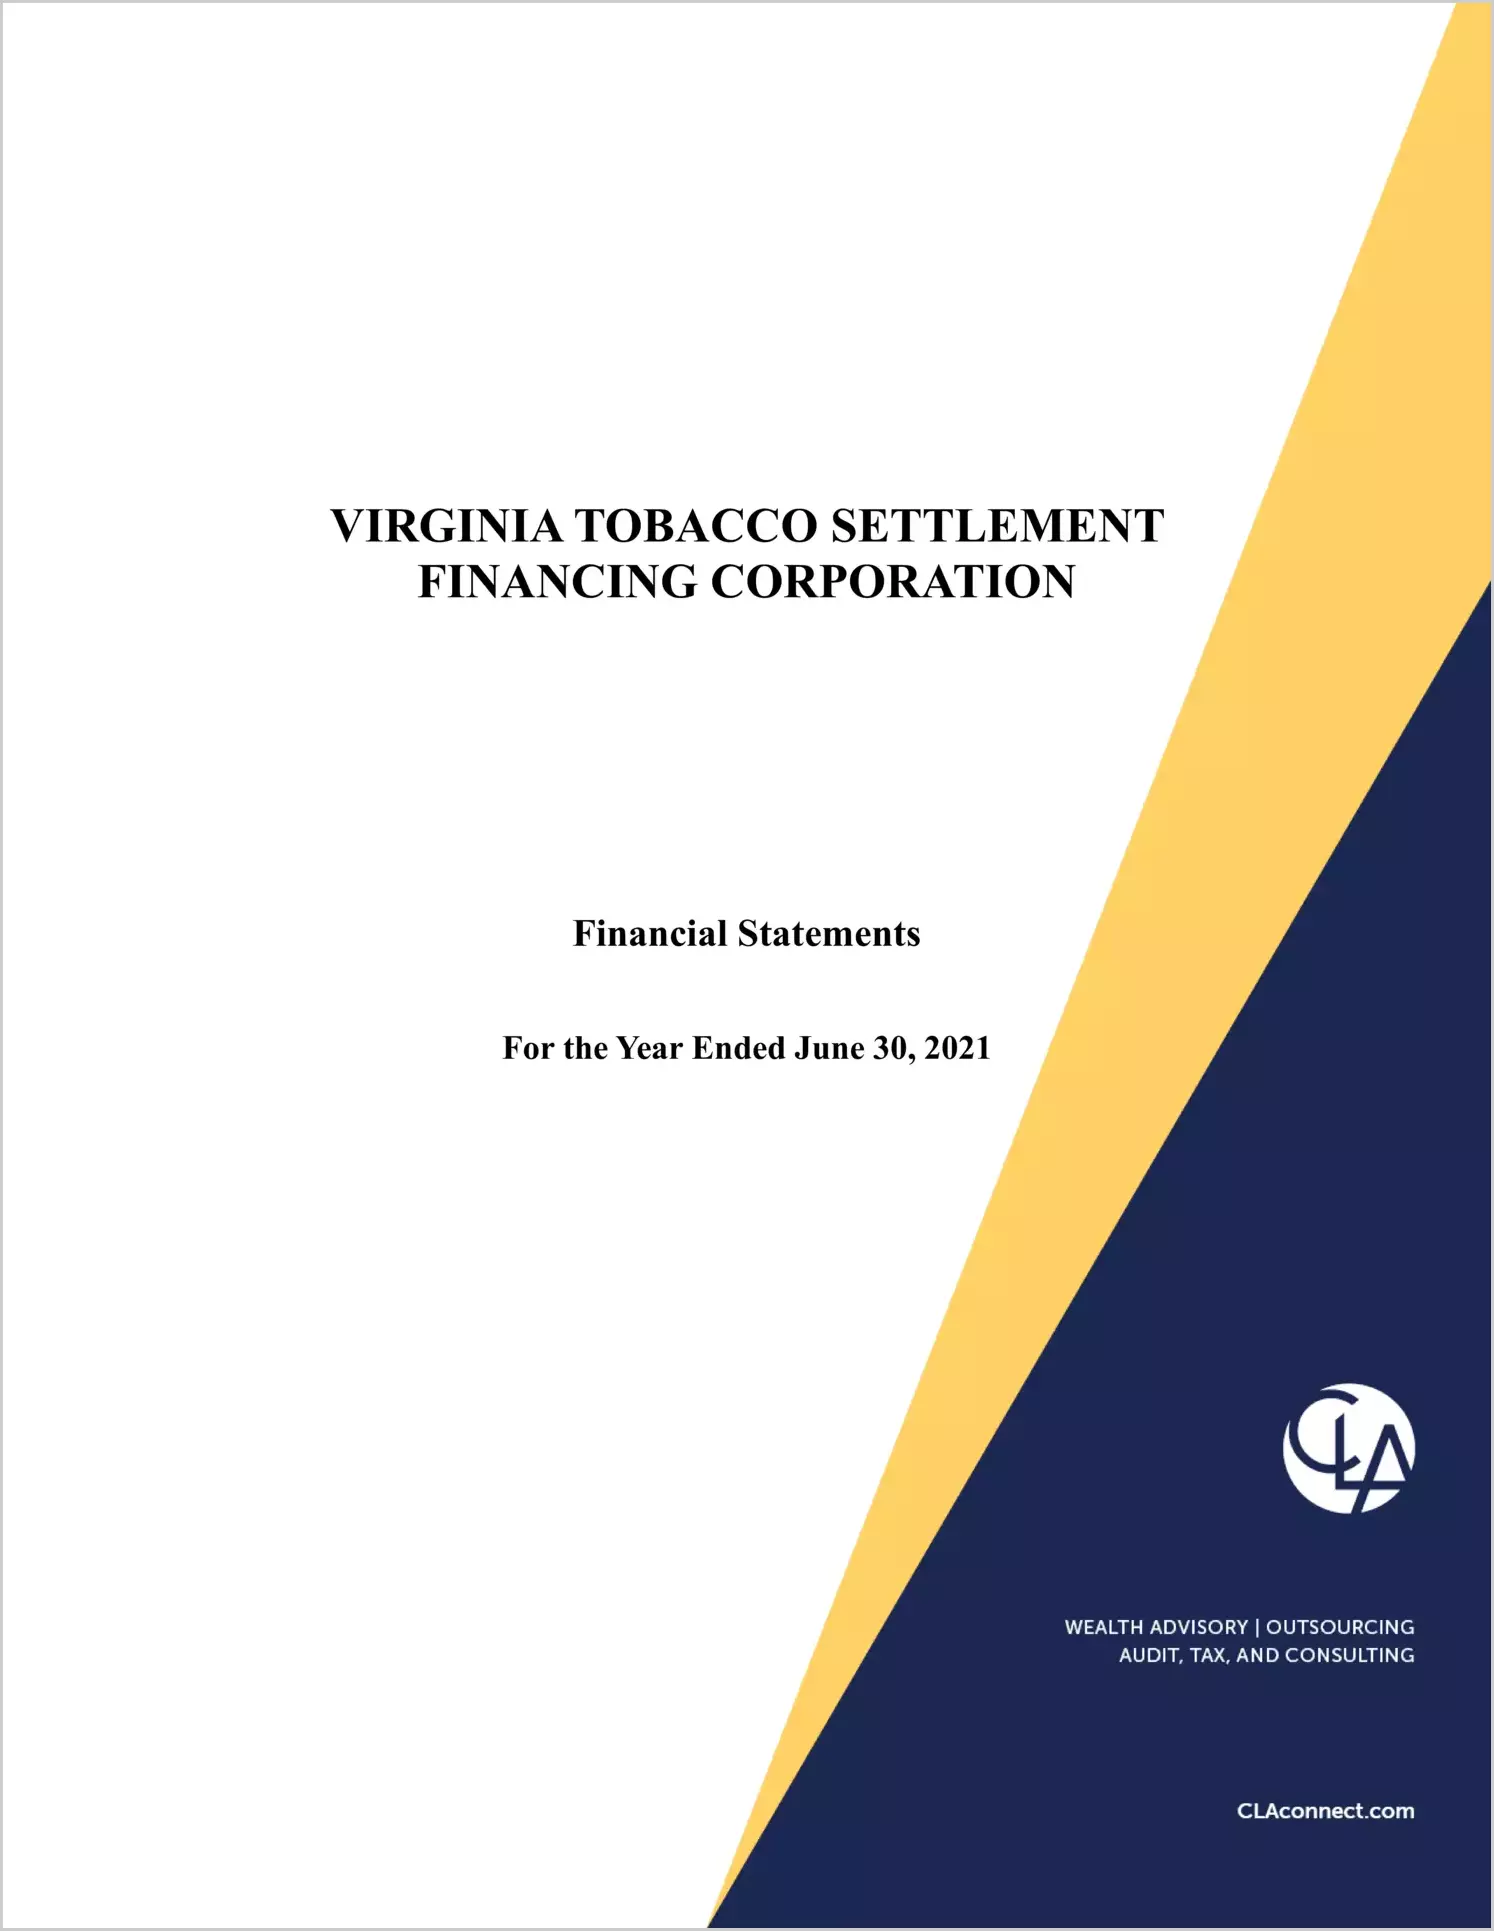 Virginia Tobacco Settlement Financing Corporation for the year ended June 30, 2021